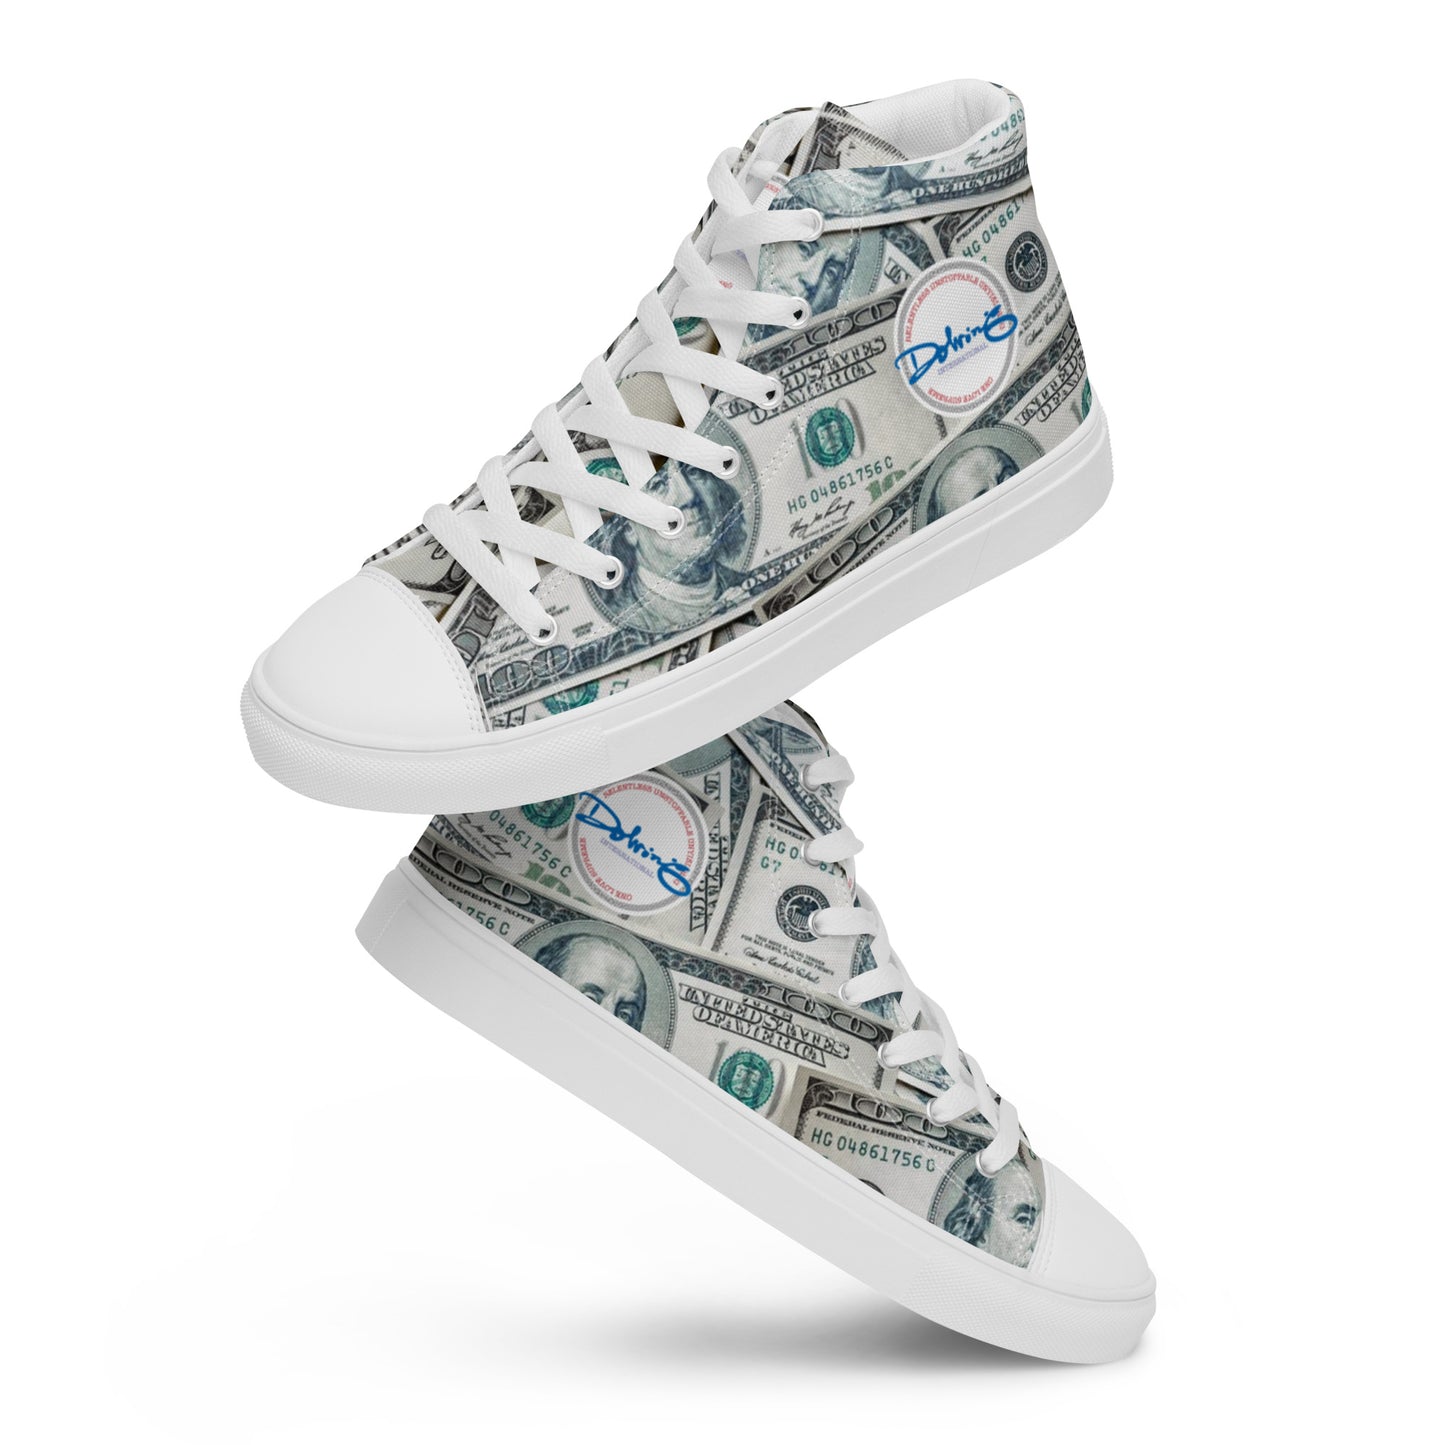 ™™™™THE CASHBAH by DOLVING - Men’s high top canvas shoes